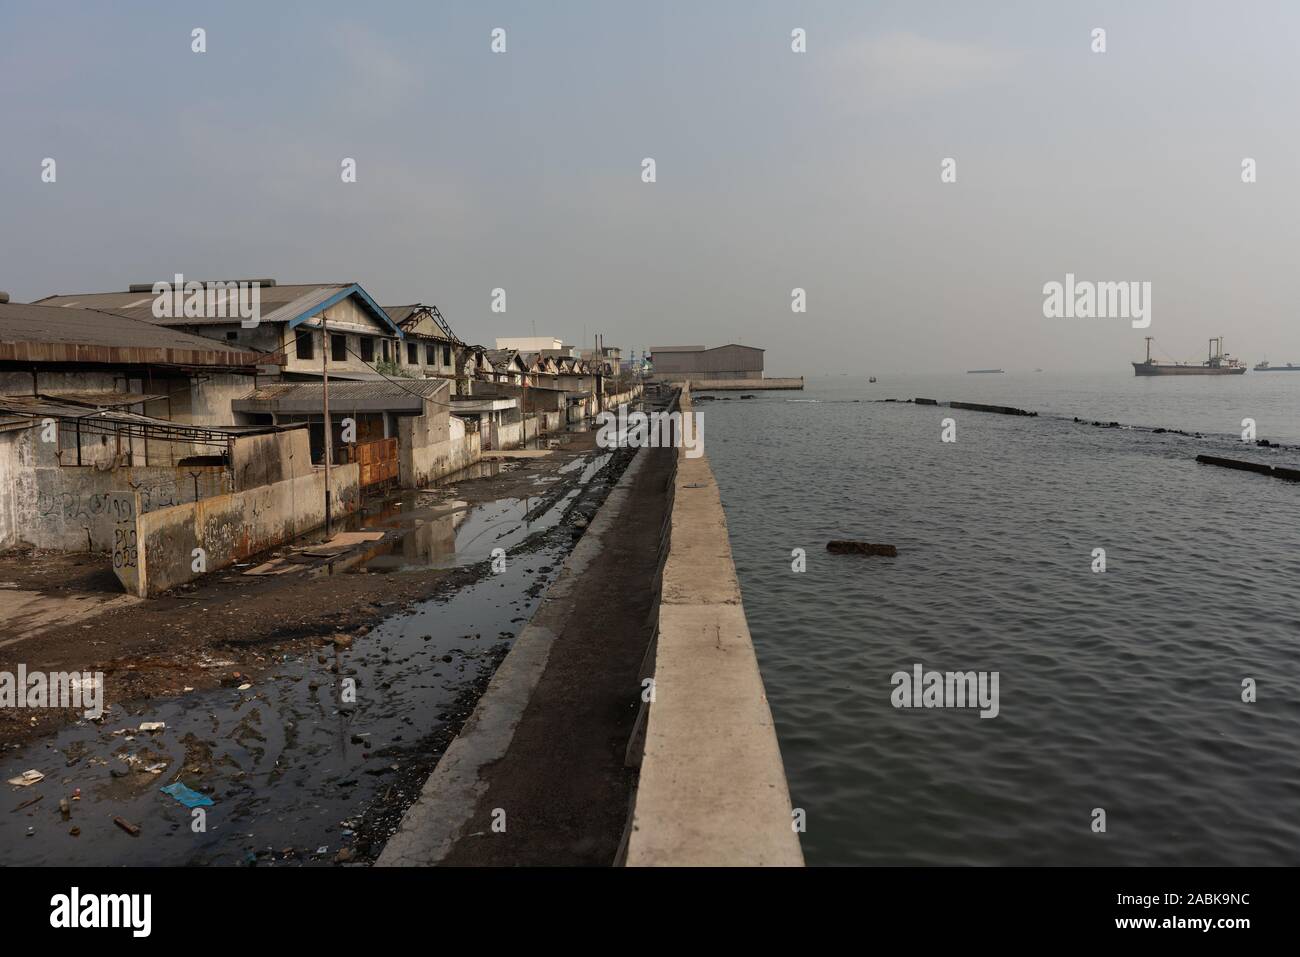 Jakarta, Indonesia. 18th Oct, 2019. Empty buildings stand along a bank in Muara Baru, North Jakarta, Indonesia. The area is below sea level and is frequently affected by flooding. (to dpa: "The sea, the wall and power of destroyed nature") Credit: Fauzan Ijazah/dpa/Alamy Live News Stock Photo